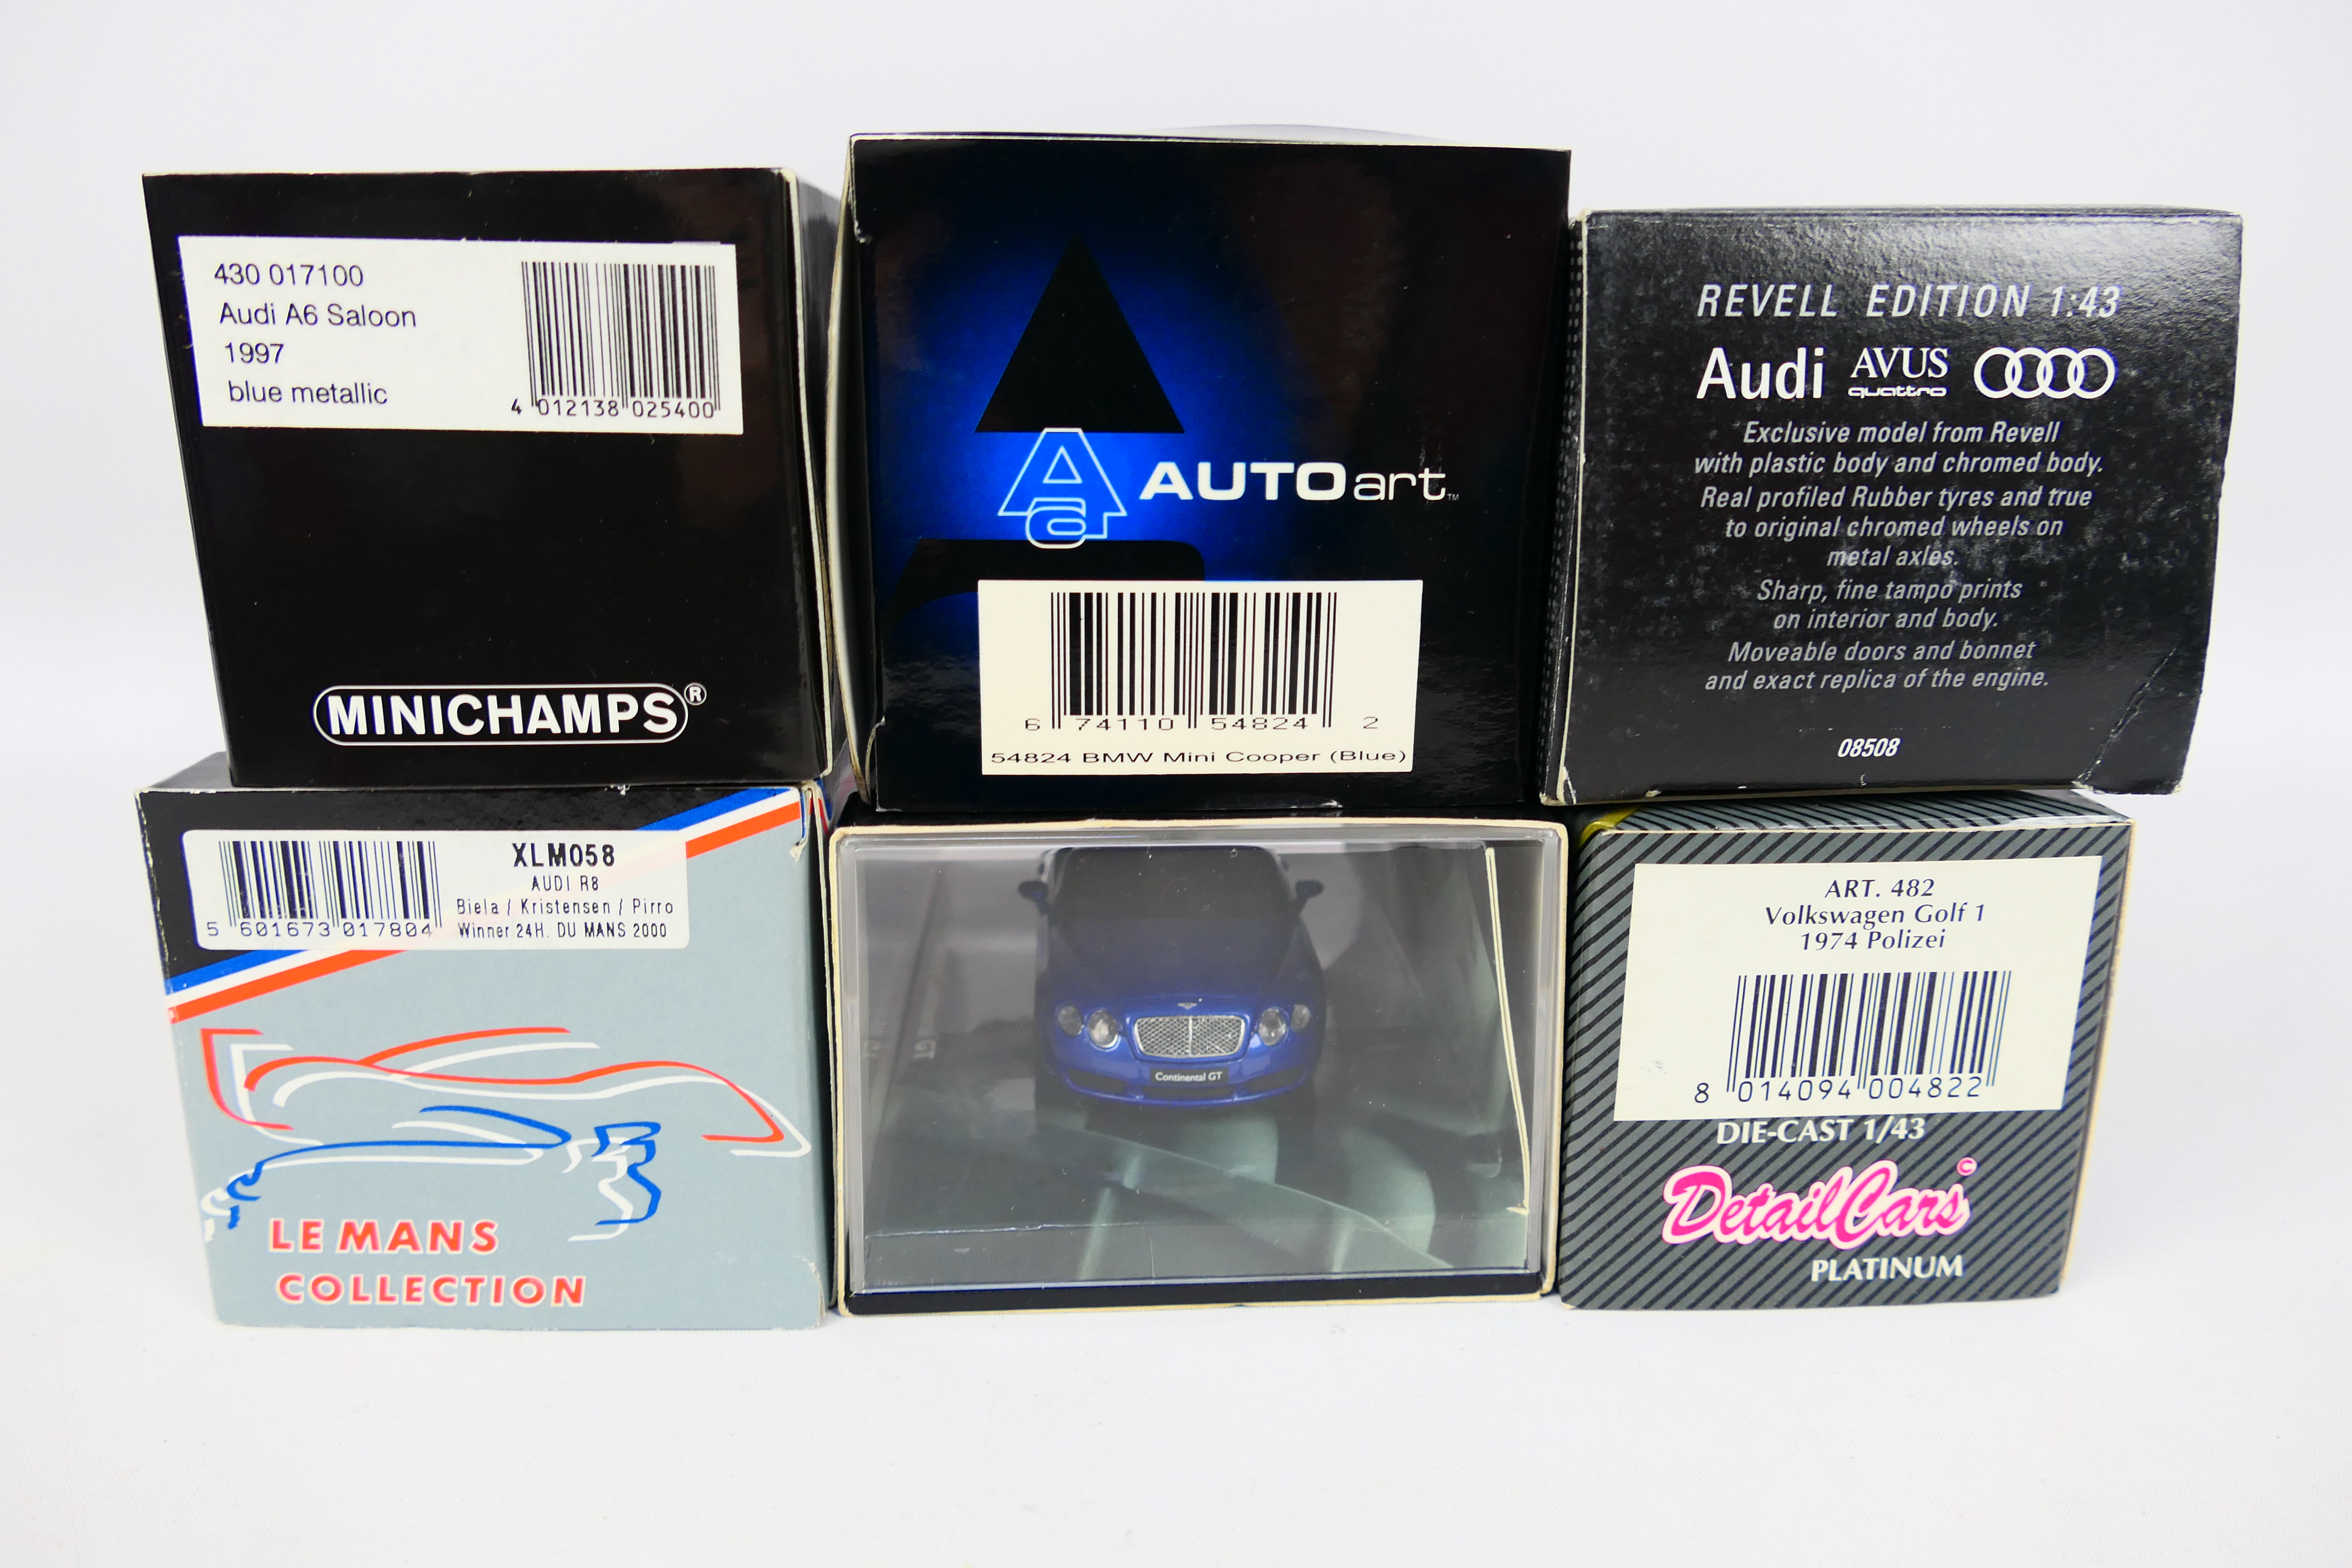 Minichamps - AutoArt - Revell - Detail Cars - Six boxed diecast 1:43 scale model vehicles. - Image 10 of 10